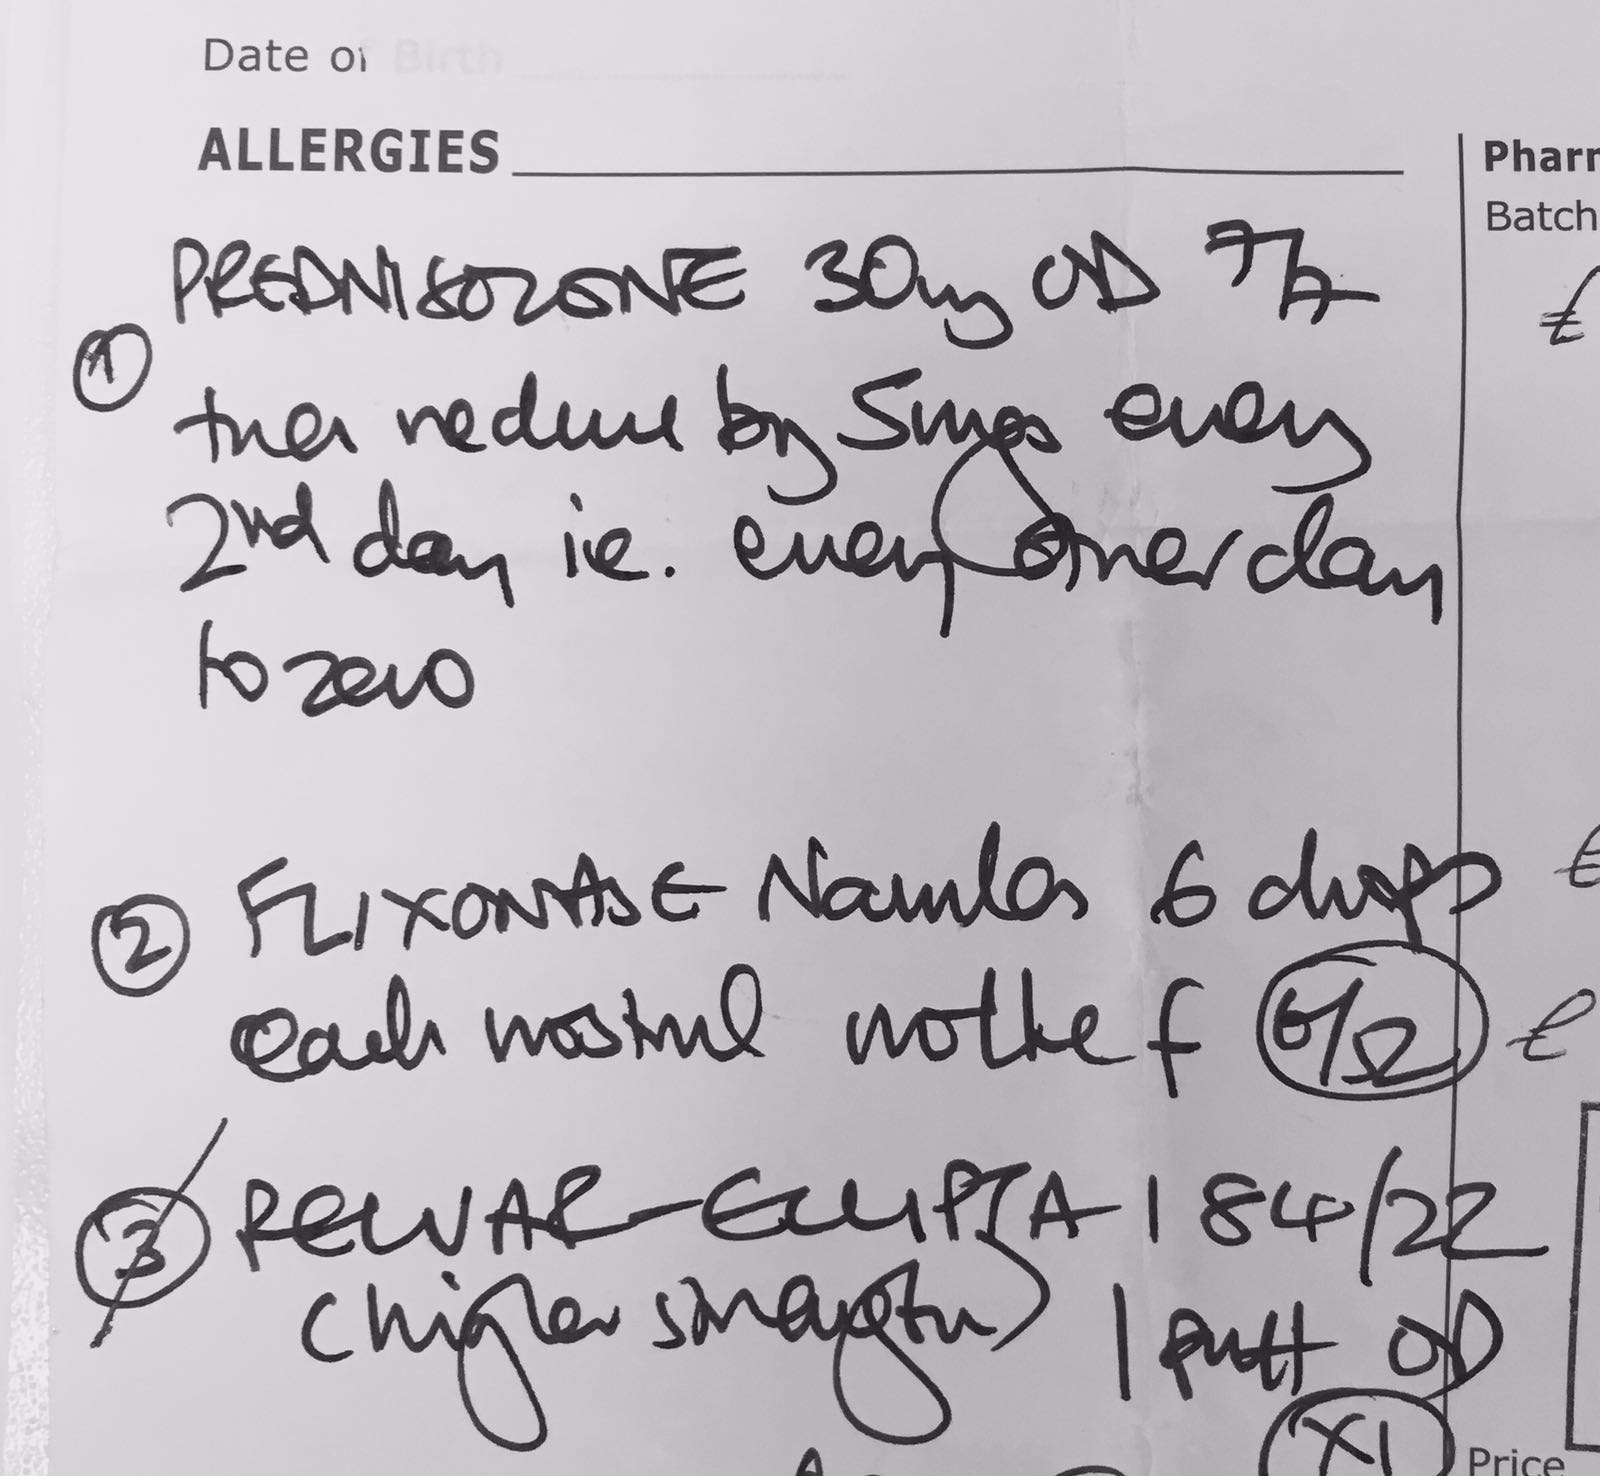 ambiguous hand written prescription for a community pharmacist to dispense 